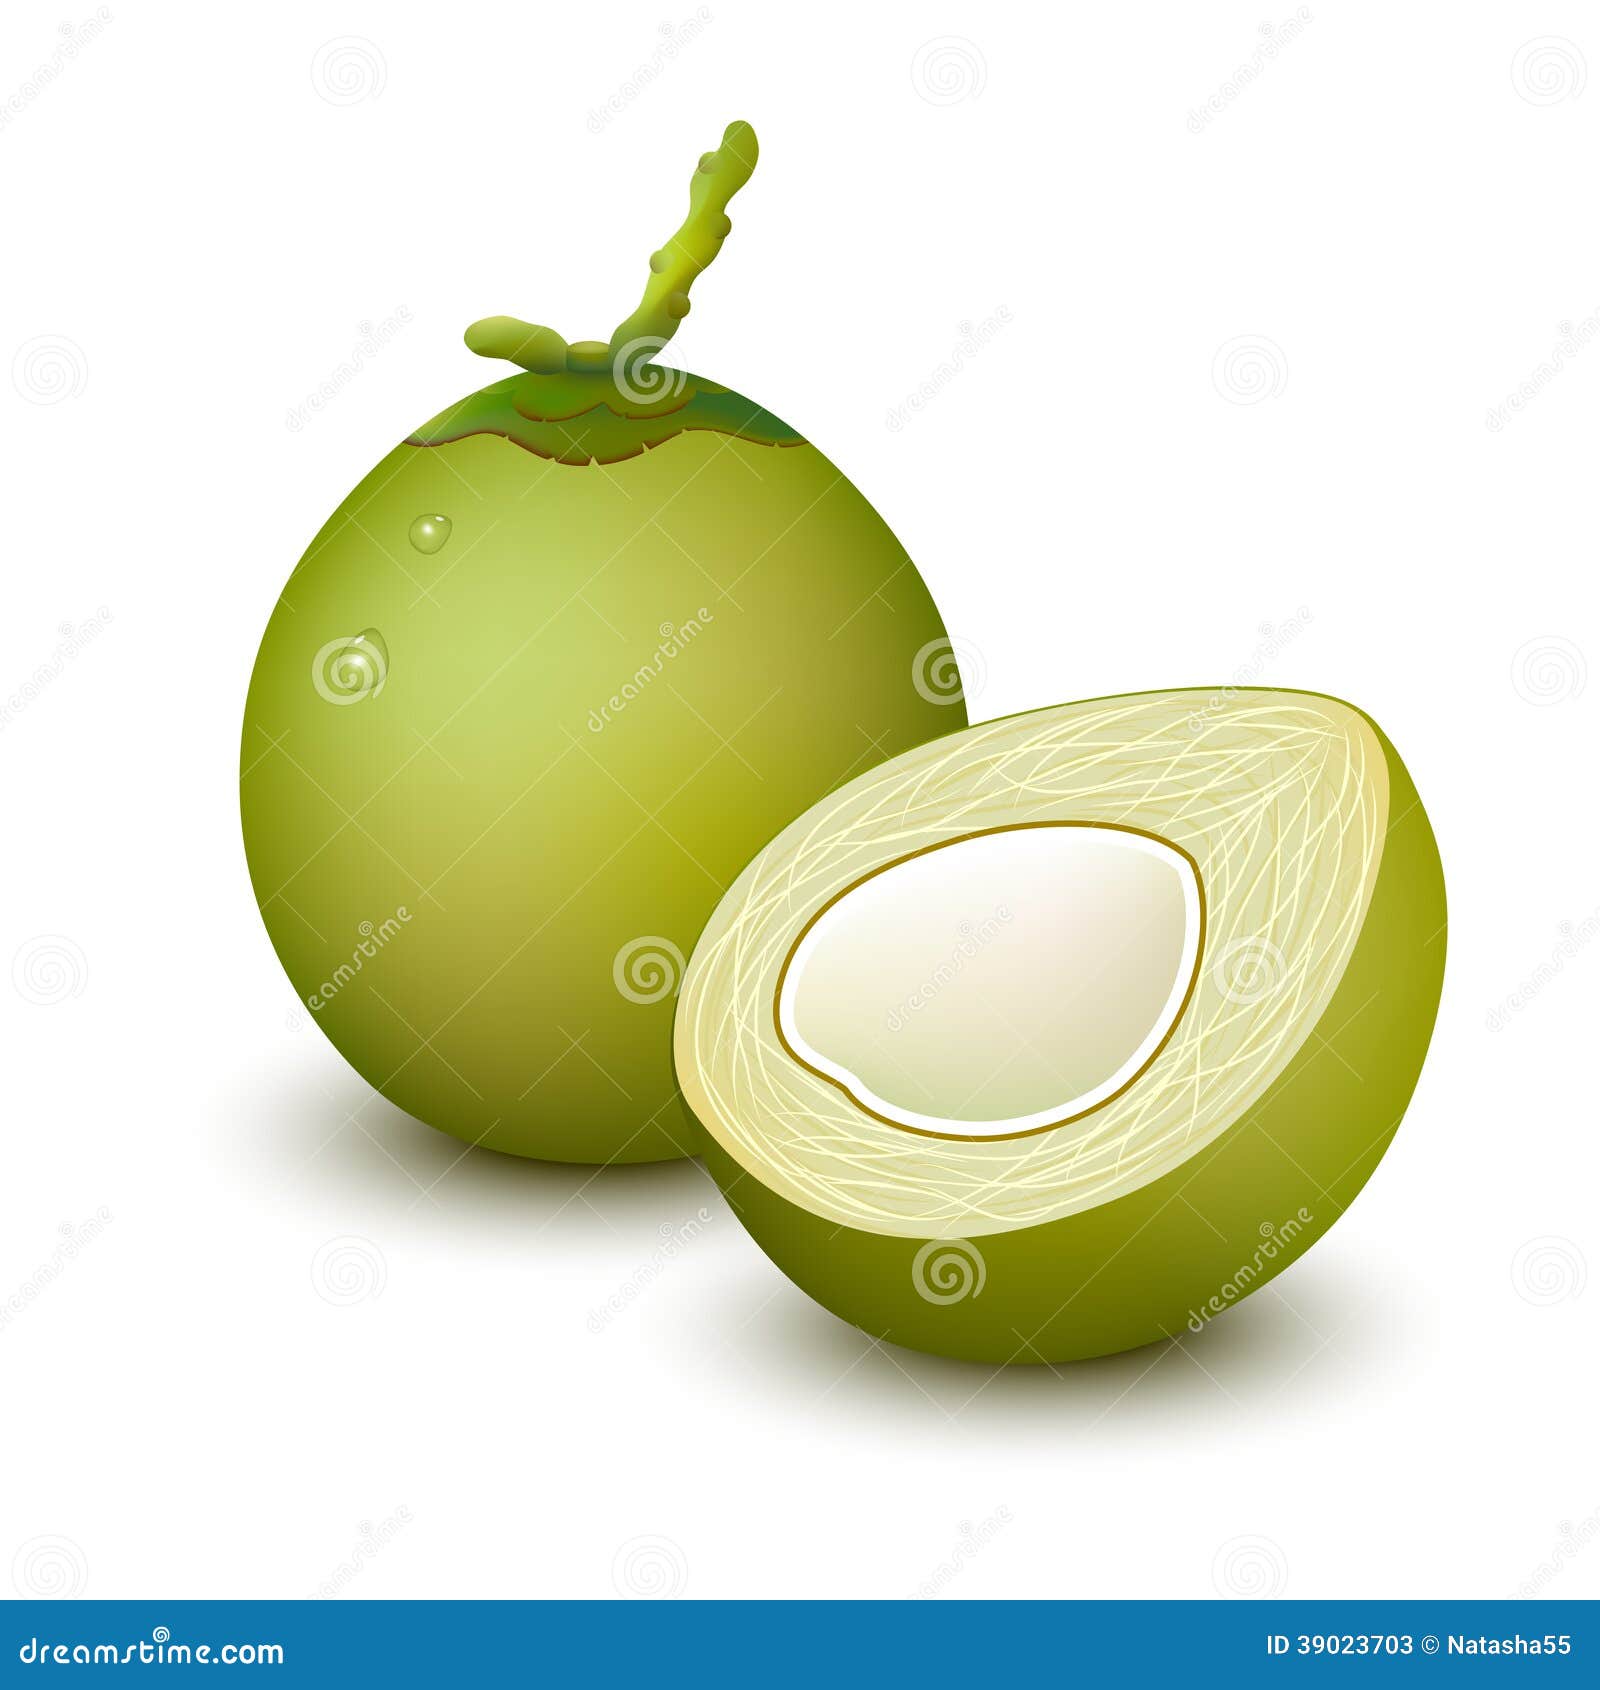 Young green coconut stock vector. Illustration of healthy - 39023703